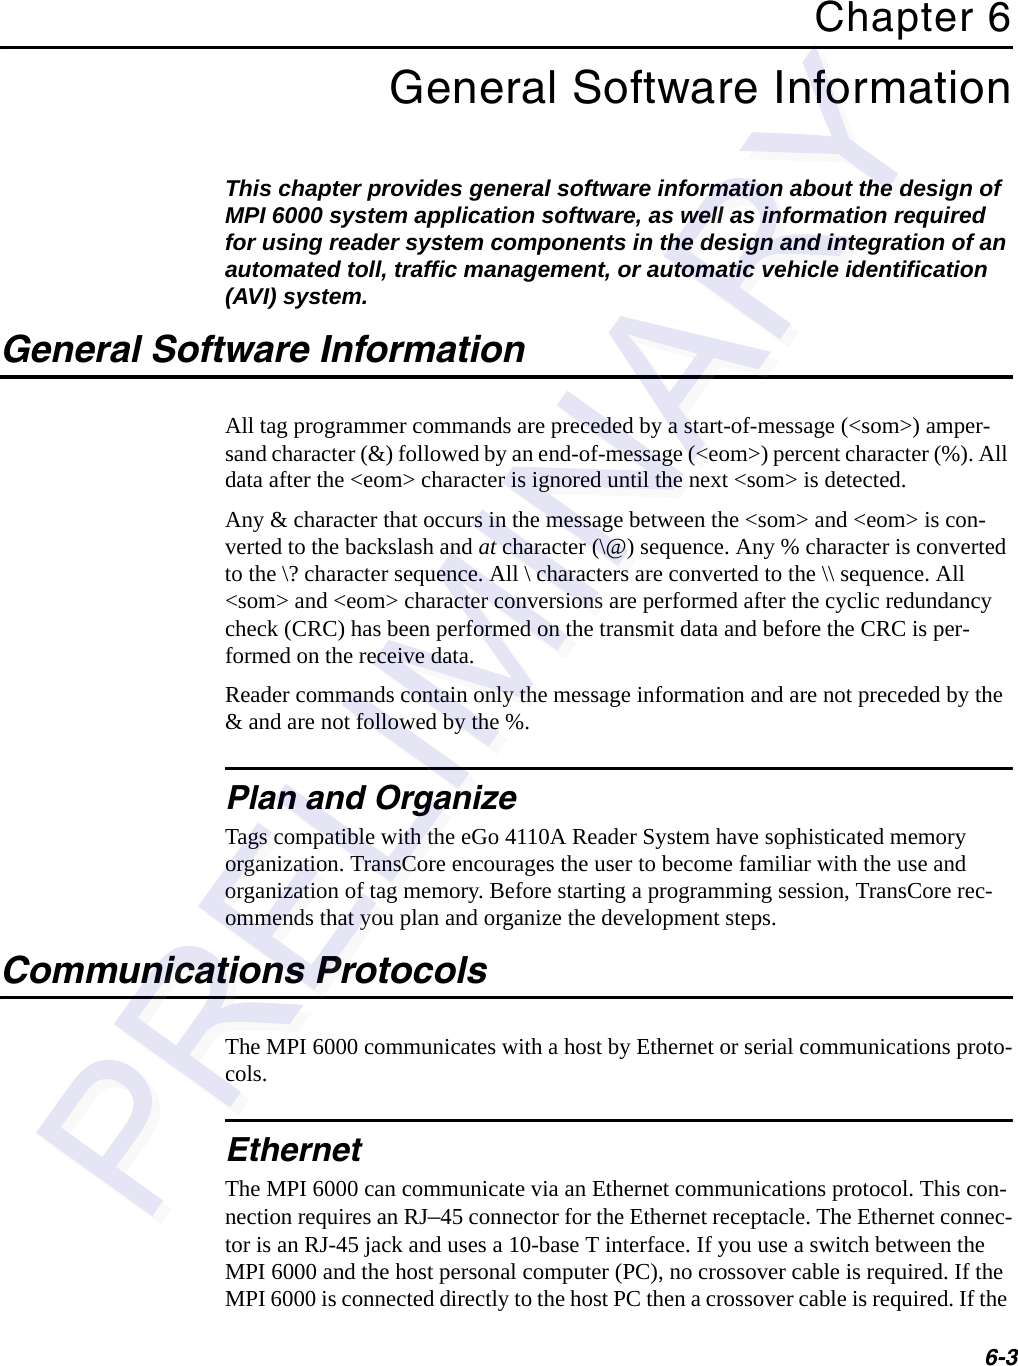 6-3Chapter 6General Software InformationThis chapter provides general software information about the design of MPI 6000 system application software, as well as information required for using reader system components in the design and integration of an automated toll, traffic management, or automatic vehicle identification (AVI) system.General Software InformationAll tag programmer commands are preceded by a start-of-message (&lt;som&gt;) amper-sand character (&amp;) followed by an end-of-message (&lt;eom&gt;) percent character (%). All data after the &lt;eom&gt; character is ignored until the next &lt;som&gt; is detected.Any &amp; character that occurs in the message between the &lt;som&gt; and &lt;eom&gt; is con-verted to the backslash and at character (\@) sequence. Any % character is converted to the \? character sequence. All \ characters are converted to the \\ sequence. All &lt;som&gt; and &lt;eom&gt; character conversions are performed after the cyclic redundancy check (CRC) has been performed on the transmit data and before the CRC is per-formed on the receive data.Reader commands contain only the message information and are not preceded by the &amp; and are not followed by the %.Plan and OrganizeTags compatible with the eGo 4110A Reader System have sophisticated memory organization. TransCore encourages the user to become familiar with the use and organization of tag memory. Before starting a programming session, TransCore rec-ommends that you plan and organize the development steps.Communications ProtocolsThe MPI 6000 communicates with a host by Ethernet or serial communications proto-cols.EthernetThe MPI 6000 can communicate via an Ethernet communications protocol. This con-nection requires an RJ–45 connector for the Ethernet receptacle. The Ethernet connec-tor is an RJ-45 jack and uses a 10-base T interface. If you use a switch between the MPI 6000 and the host personal computer (PC), no crossover cable is required. If the MPI 6000 is connected directly to the host PC then a crossover cable is required. If the 